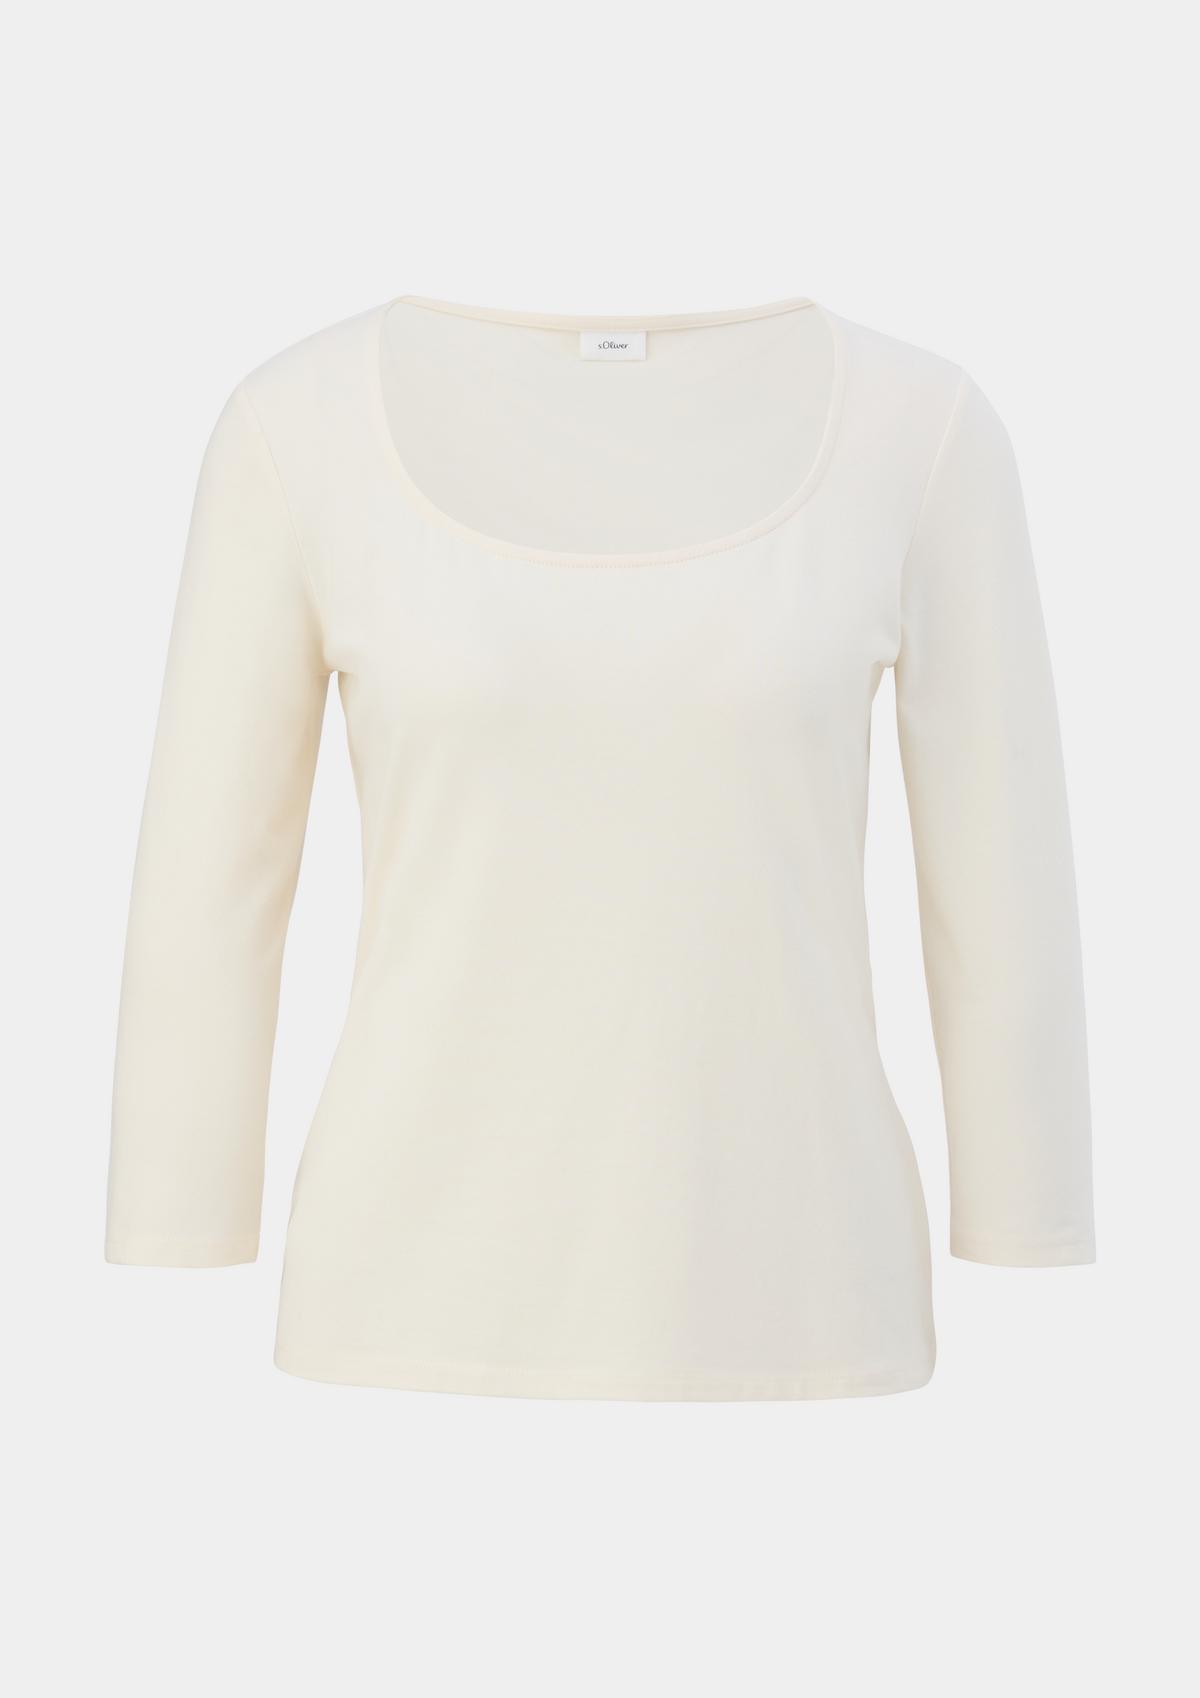 s.Oliver Long sleeve top made of stretch cotton